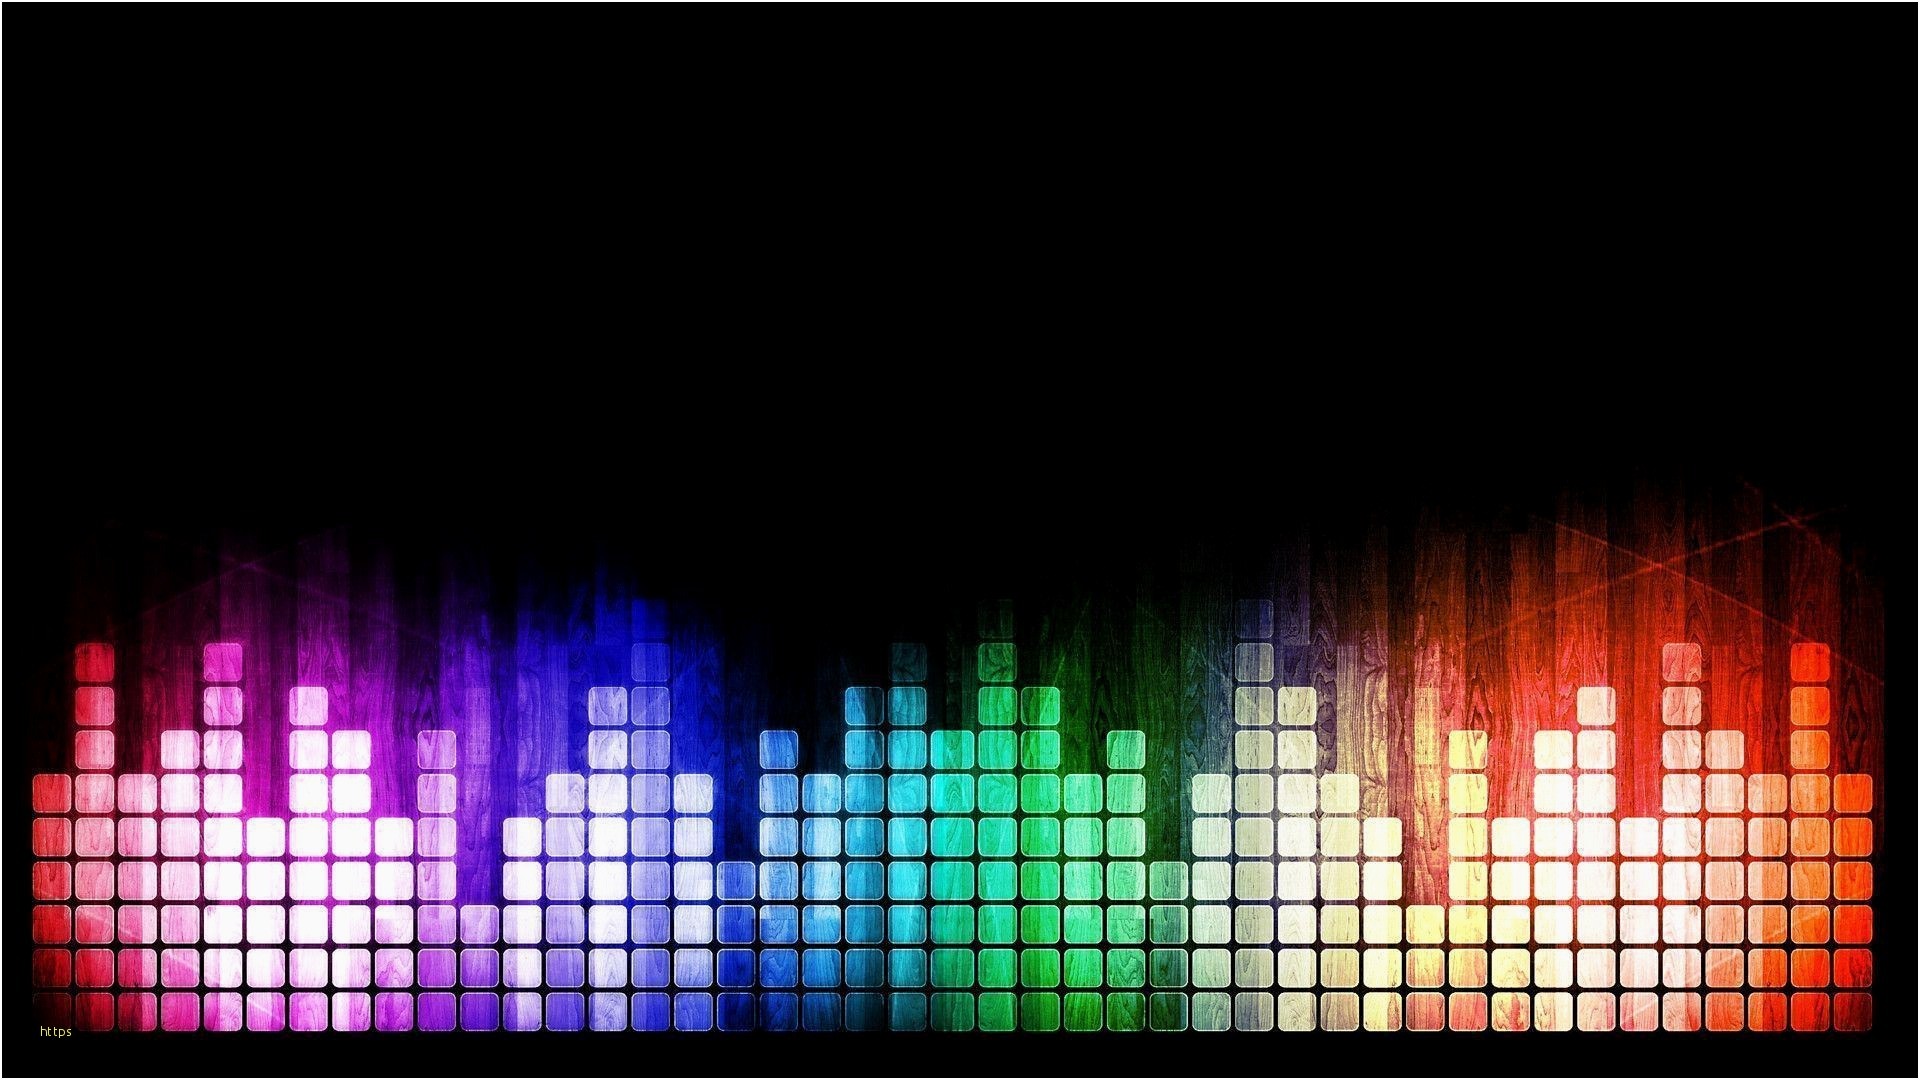 1920x1080 ... Music Wallpapers Elegant Awesome Music Backgrounds Wallpaper Cave ...